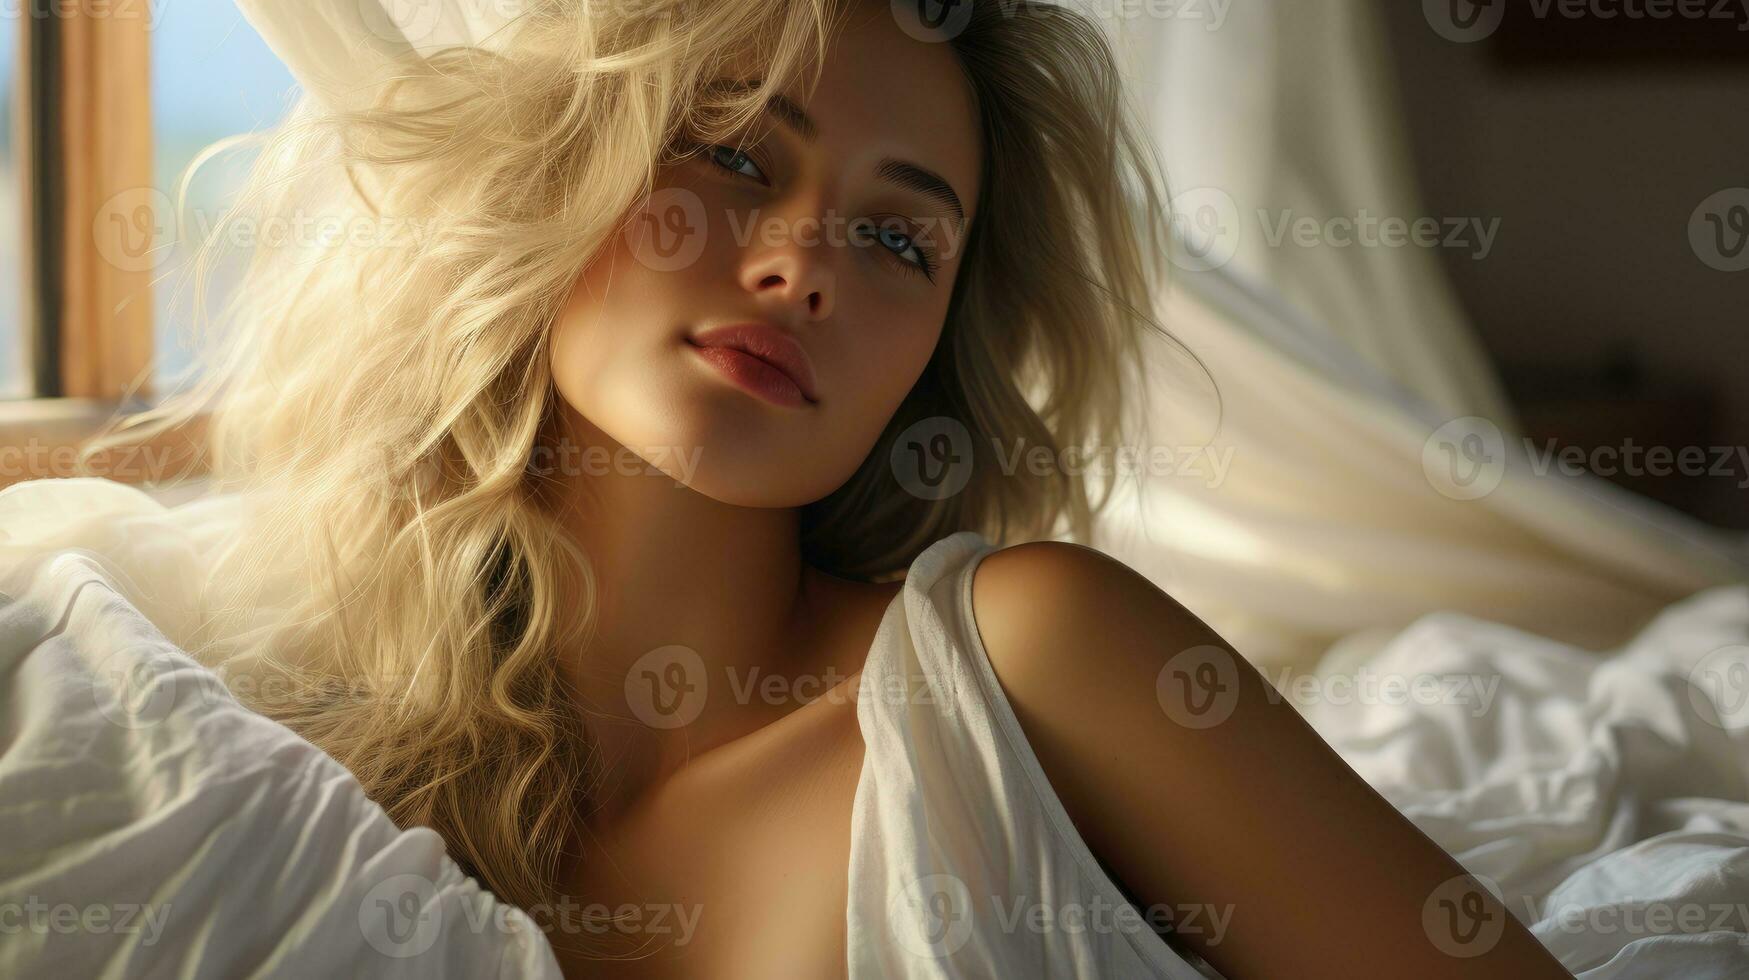 Beautiful woman waking up in the morning lying in bed between white sheets. photo